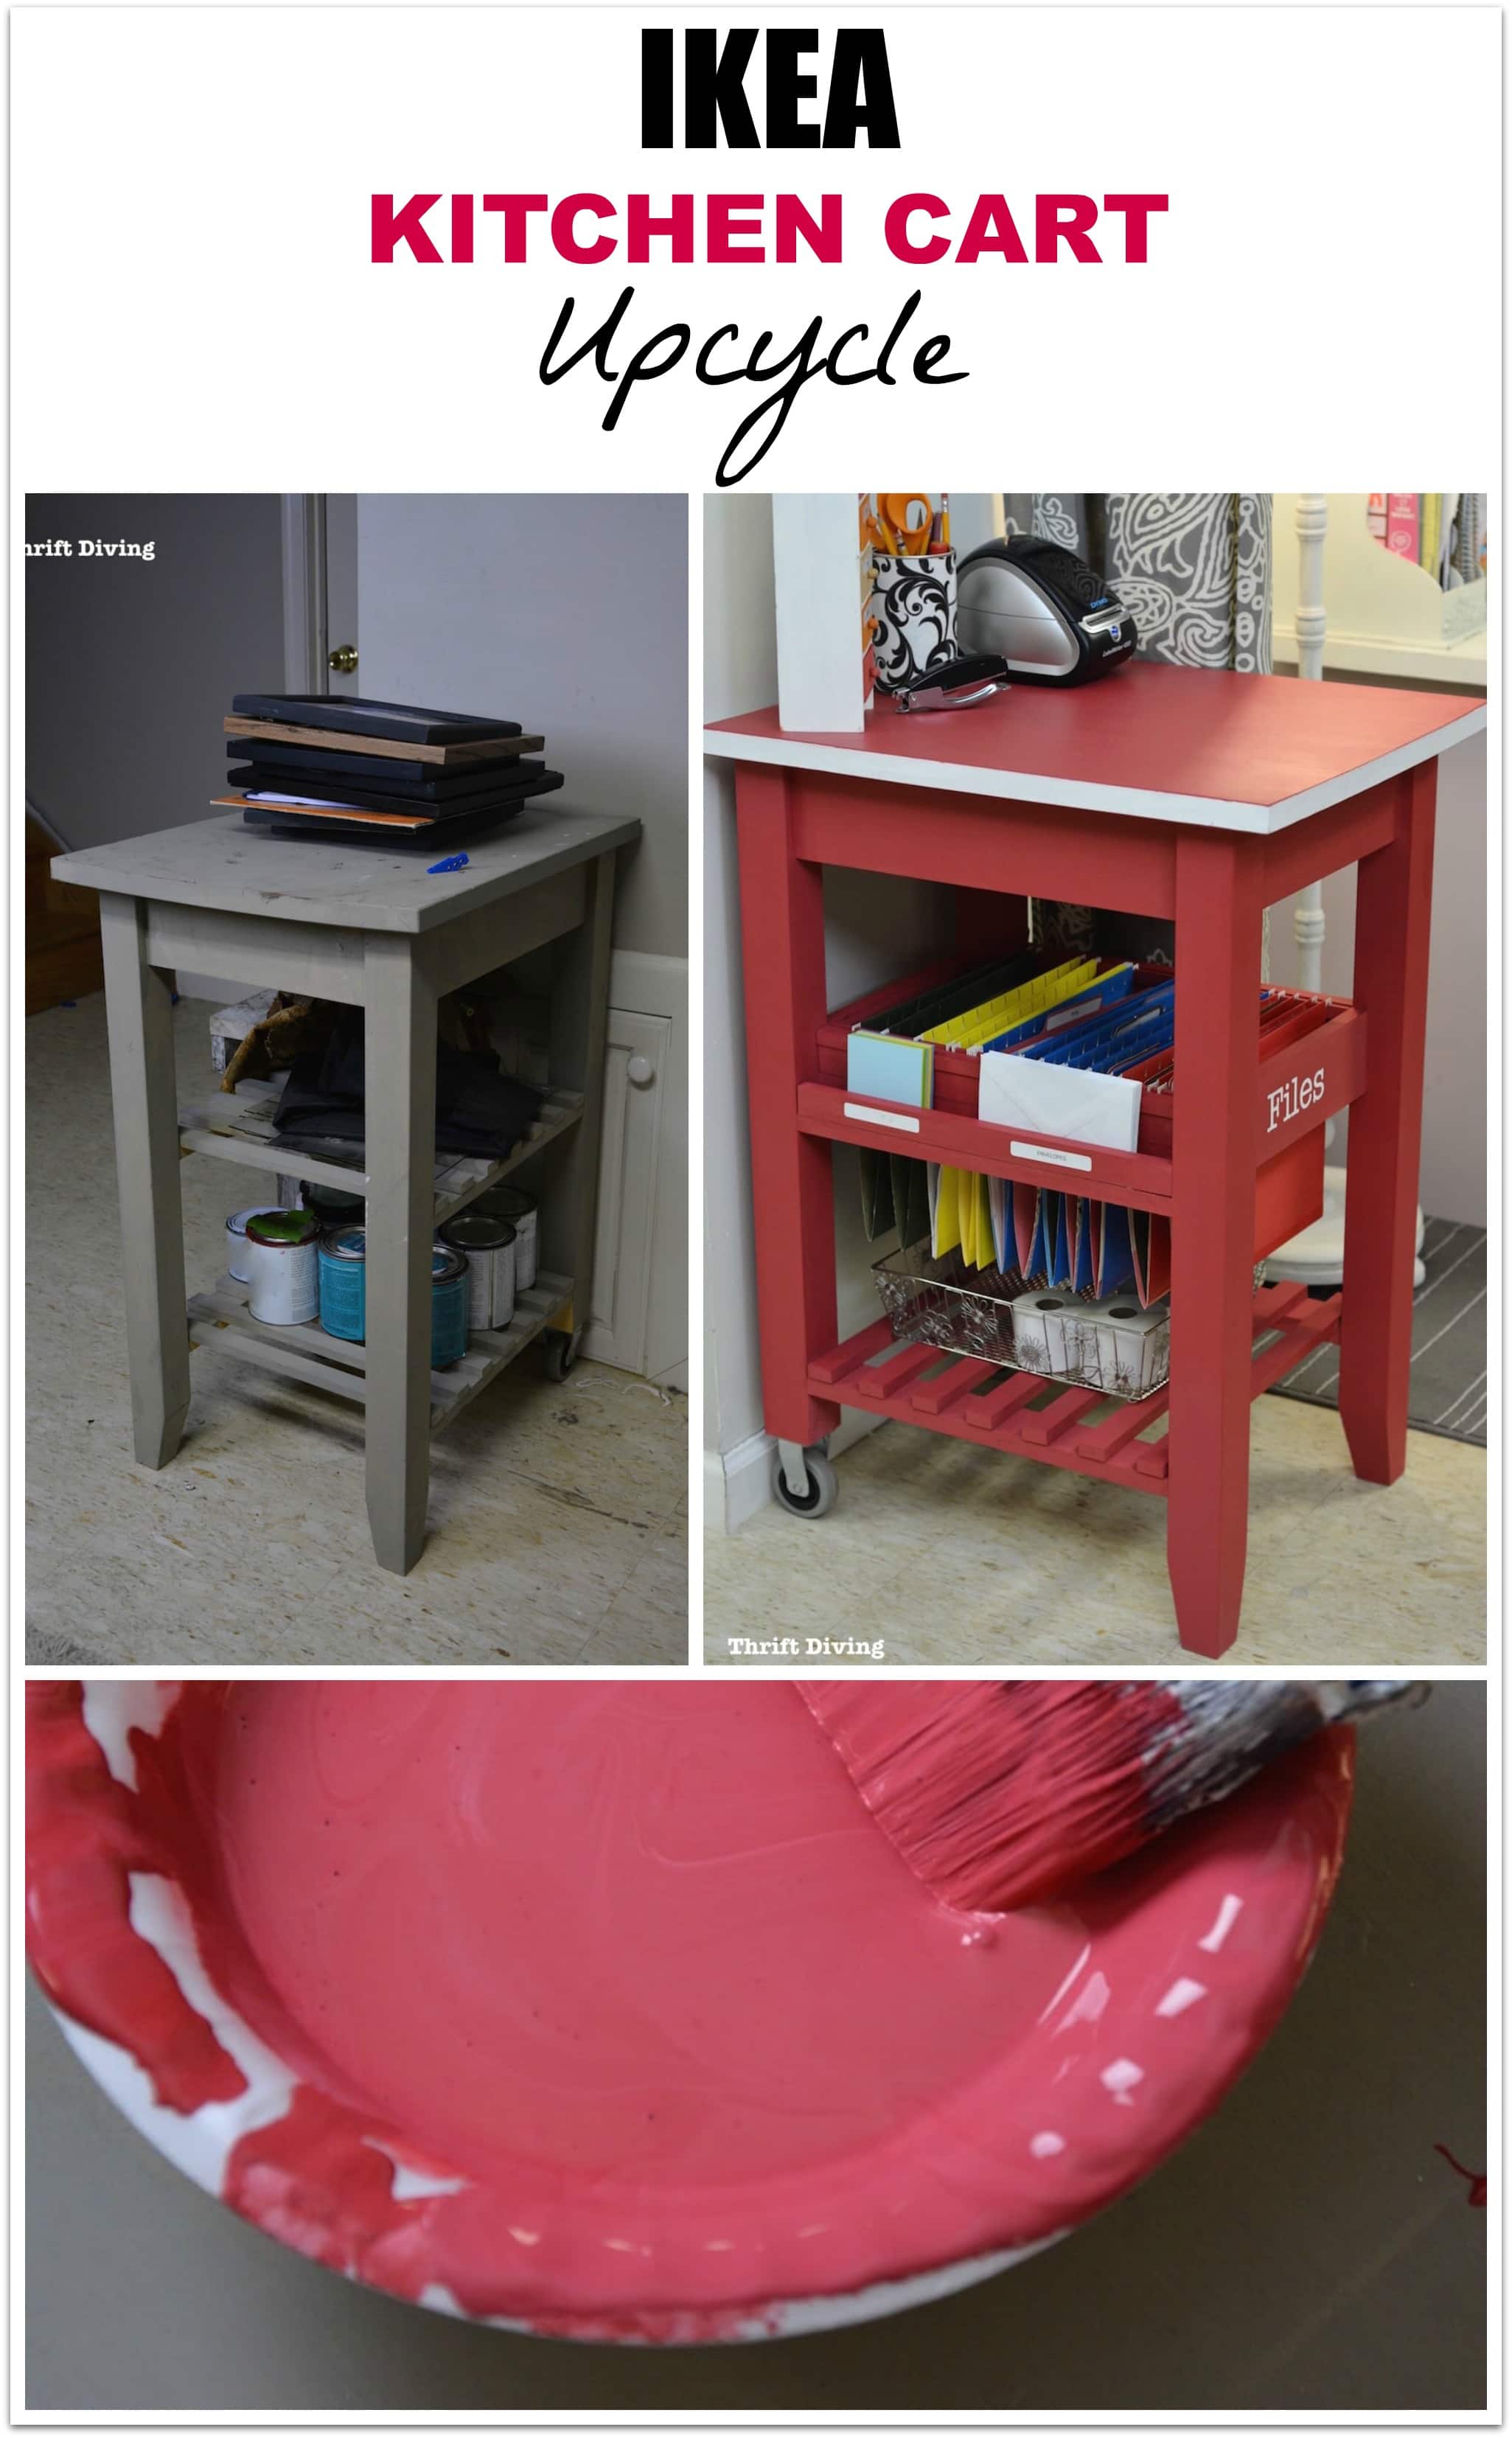 IKEA Kitchen Cart Upcycle - BEFORE and AFTER of a thrifted kitchen cart.